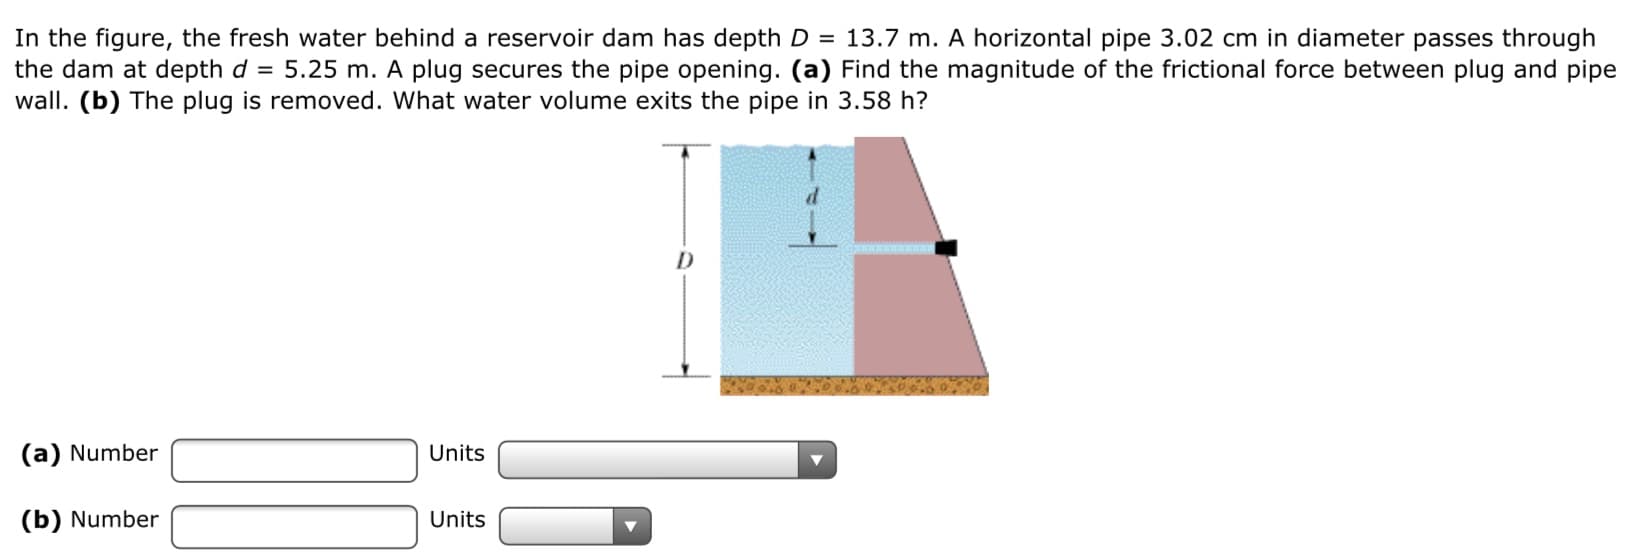 In the figure, the fresh water behind a reservoir dam has depth D = 13.7 m. A horizontal pipe 3.02 cm in diameter passes through
the dam at depth d = 5.25 m. A plug secures the pipe opening. (a) Find the magnitude of the frictional force between plug and pipe
wall. (b) The plug is removed. What water volume exits the pipe in 3.58 h?
(a) Number
Units
(b) Number
Units
